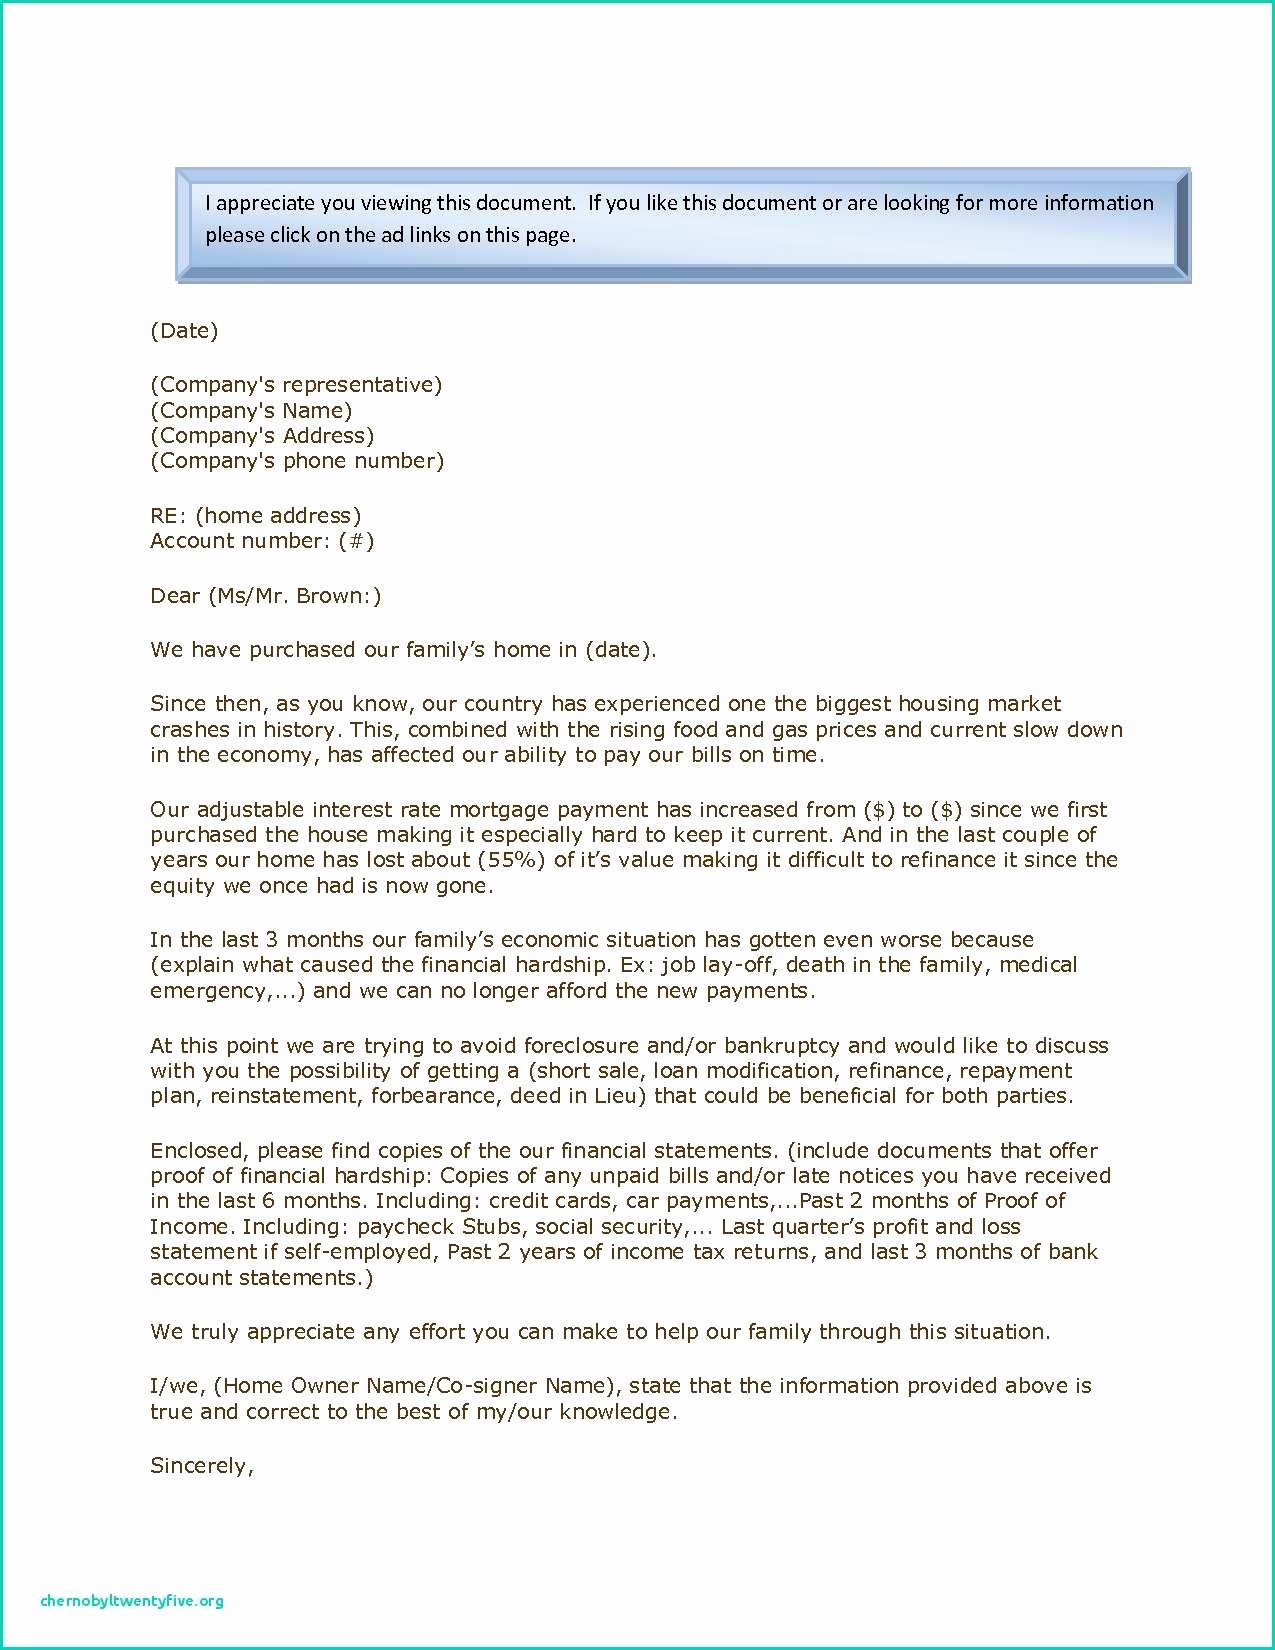 Payment Shock Letter Luxury Example Hardship Letter for Mortgage Modification